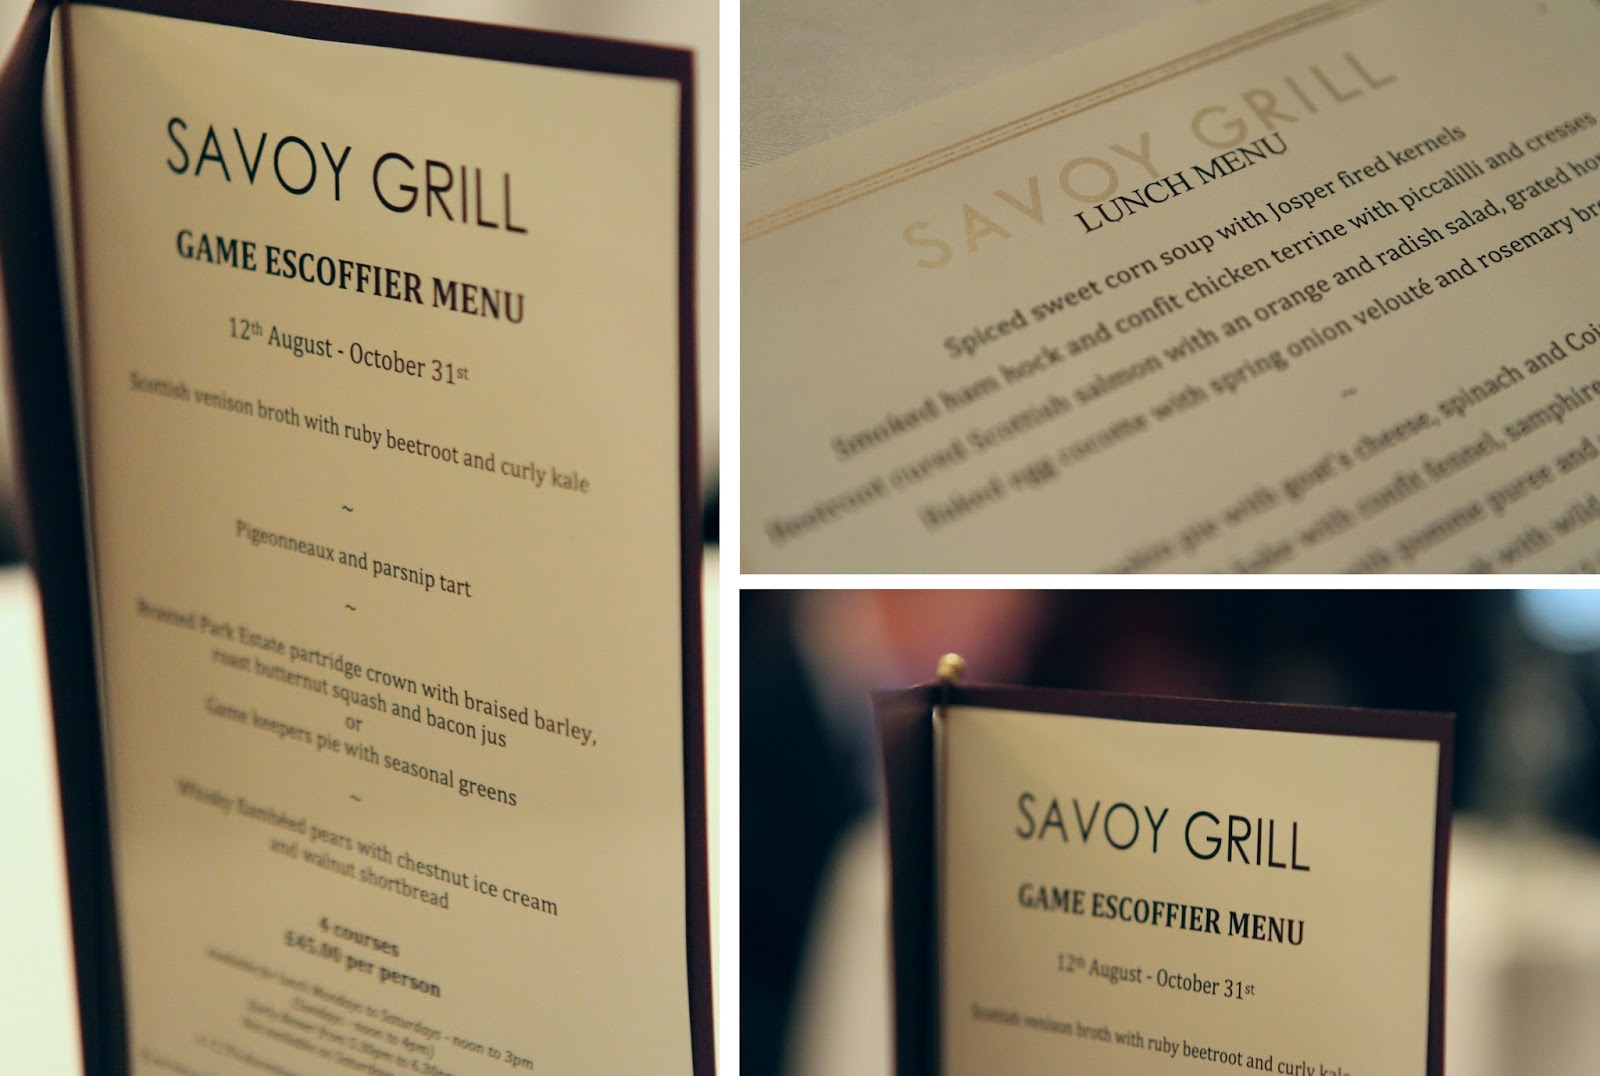 The Savoy grill